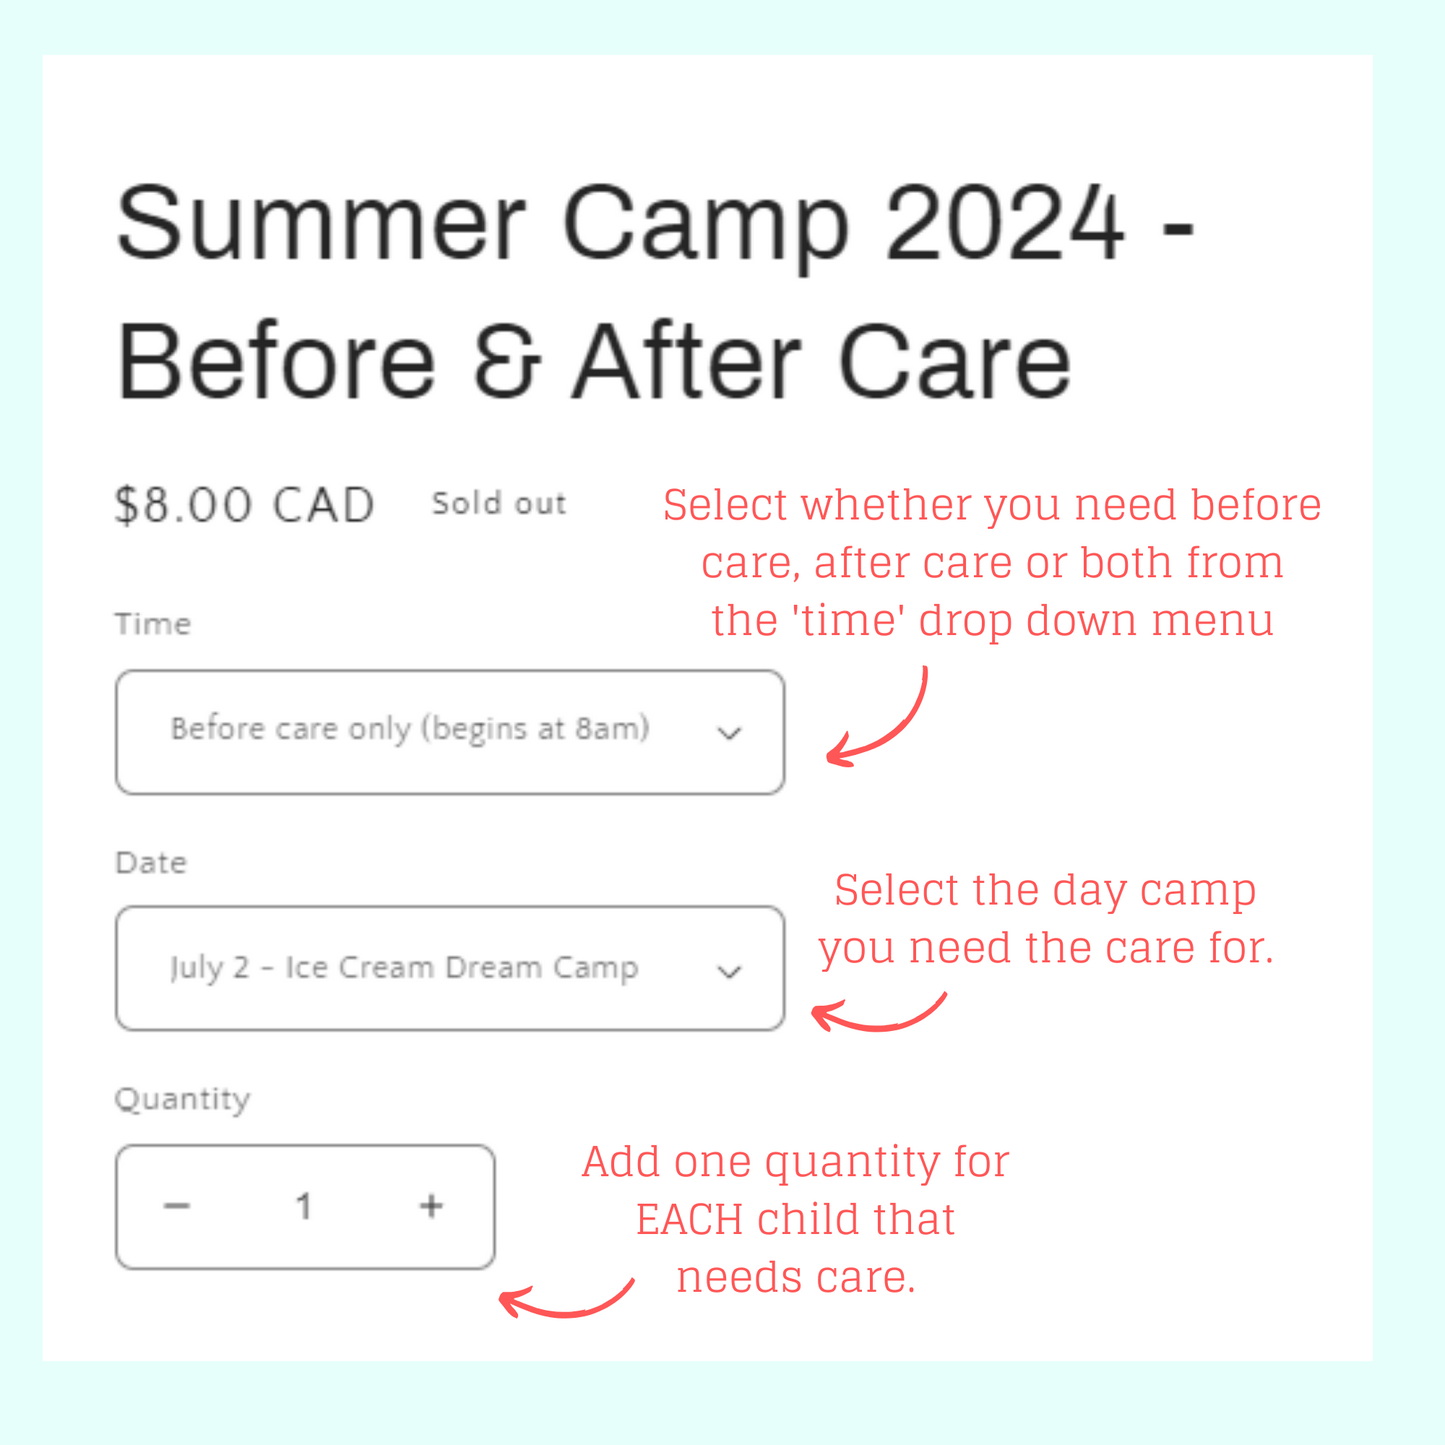 Summer Camp 2024 - Before & After Care